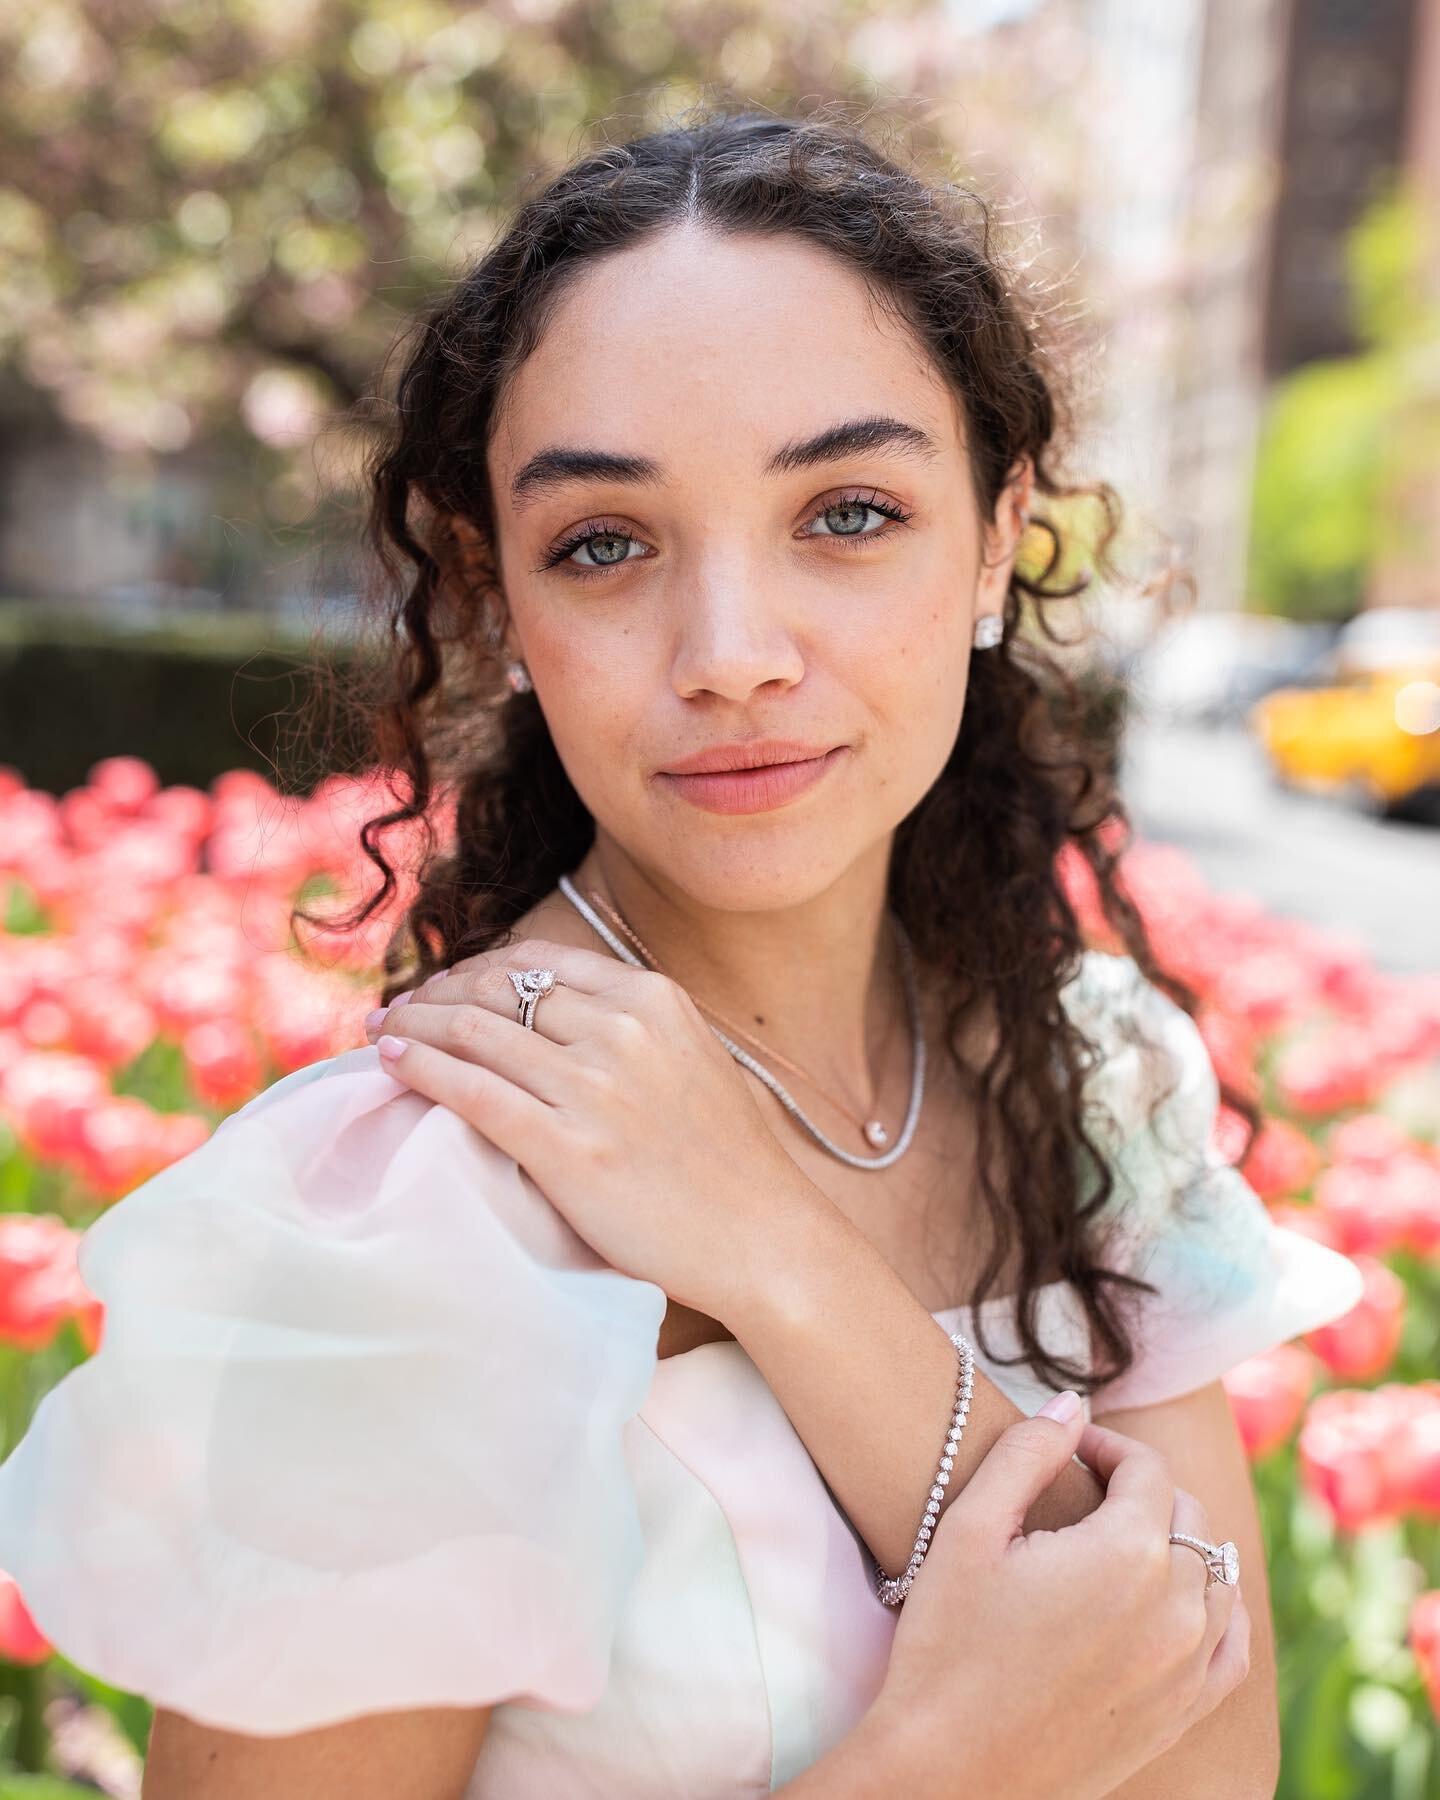 This spring, we&rsquo;re taking notes and getting inspired by the blooms on the Upper East Side. What inspires your jewelry selection? 🌸🌷💍 #kimsjewelrynyc #uppereastside #diamondjewelry